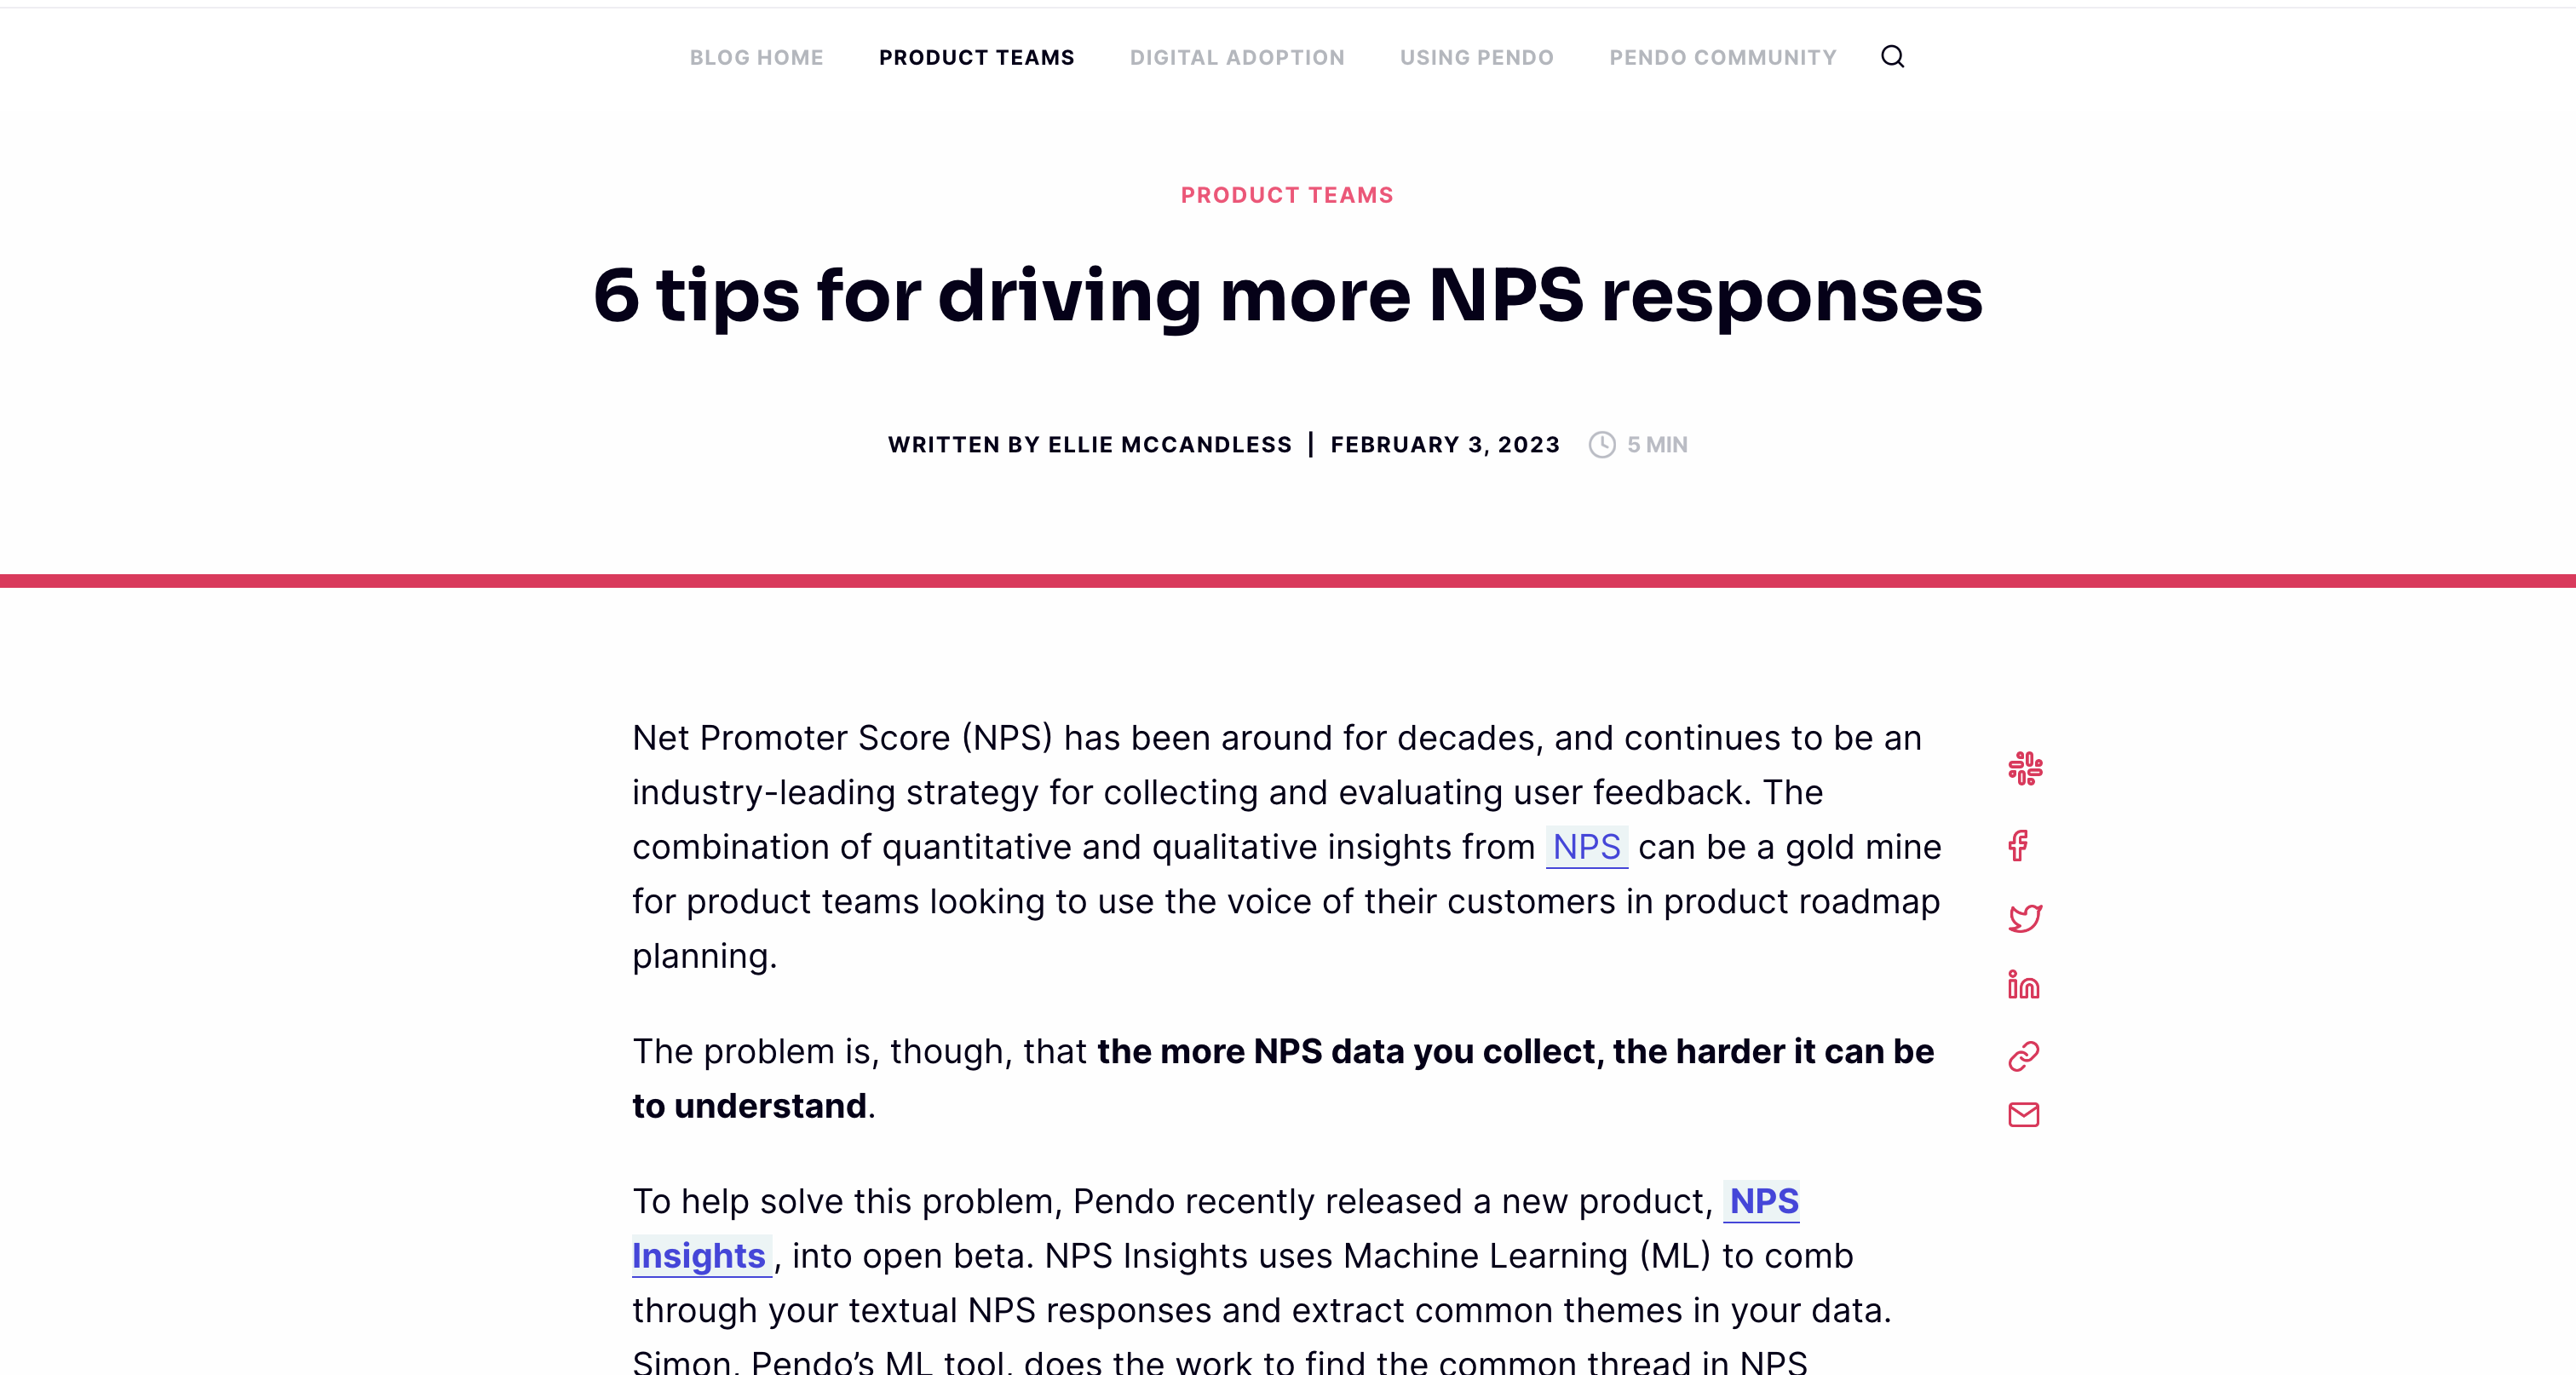 6 tips for driving more NPS responses